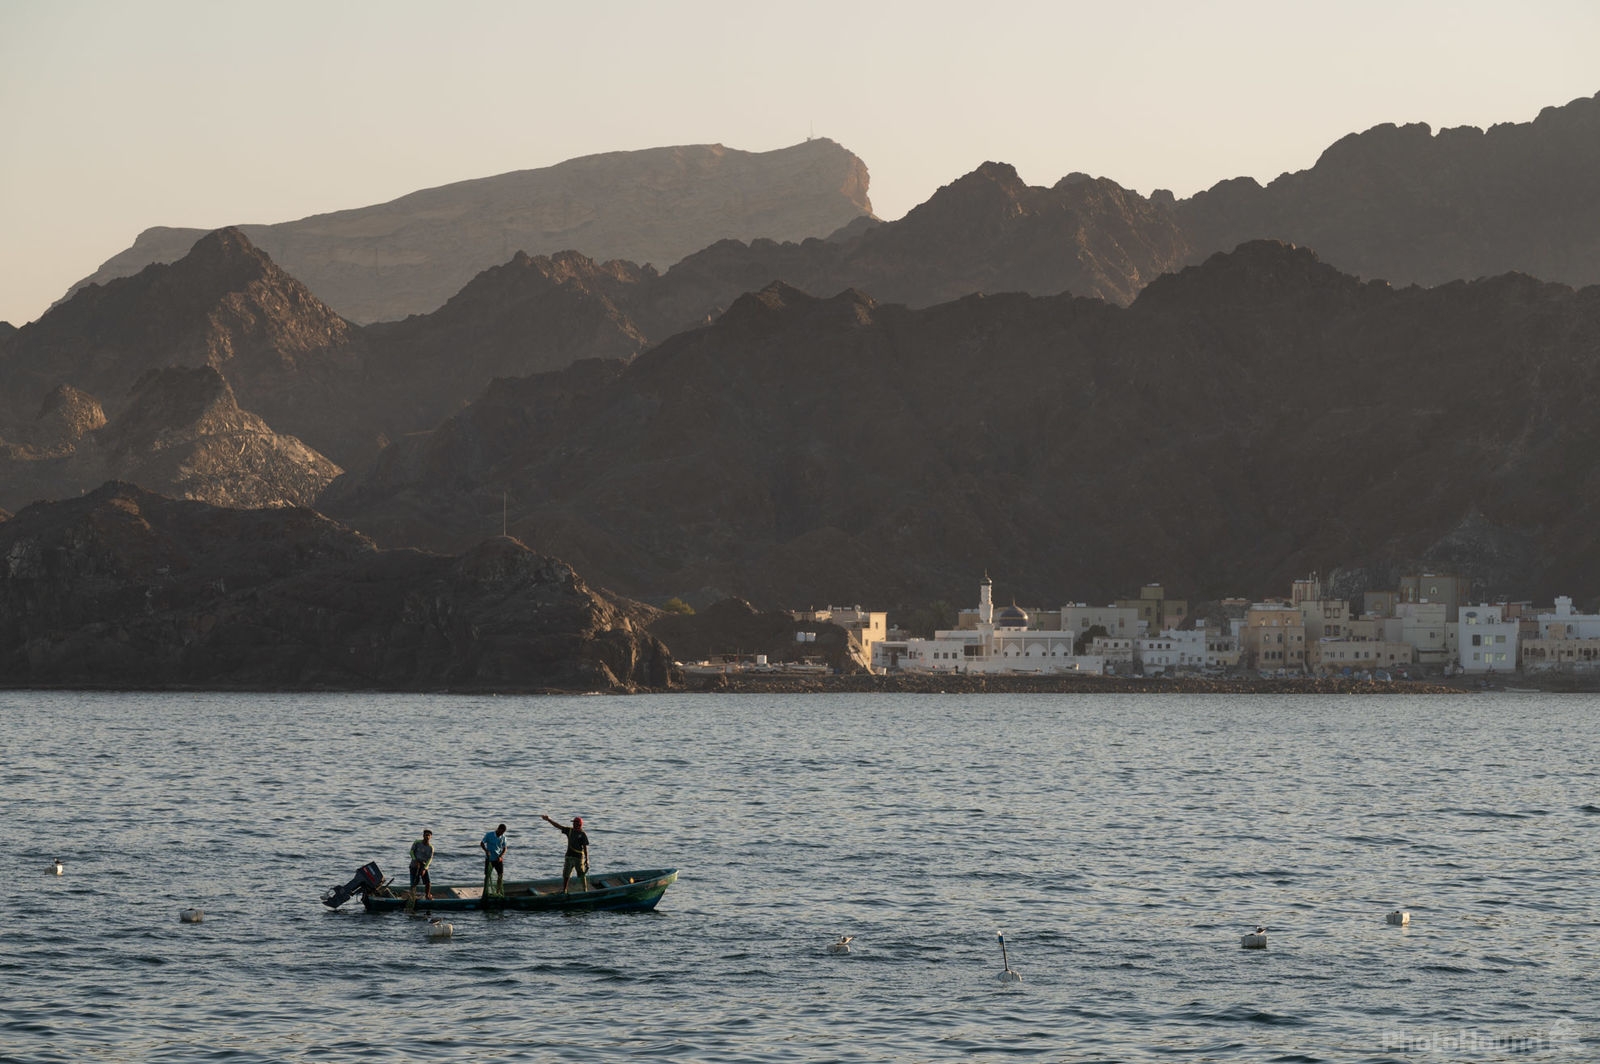 Image of Sunset Cruise in Muscat by Luka Esenko